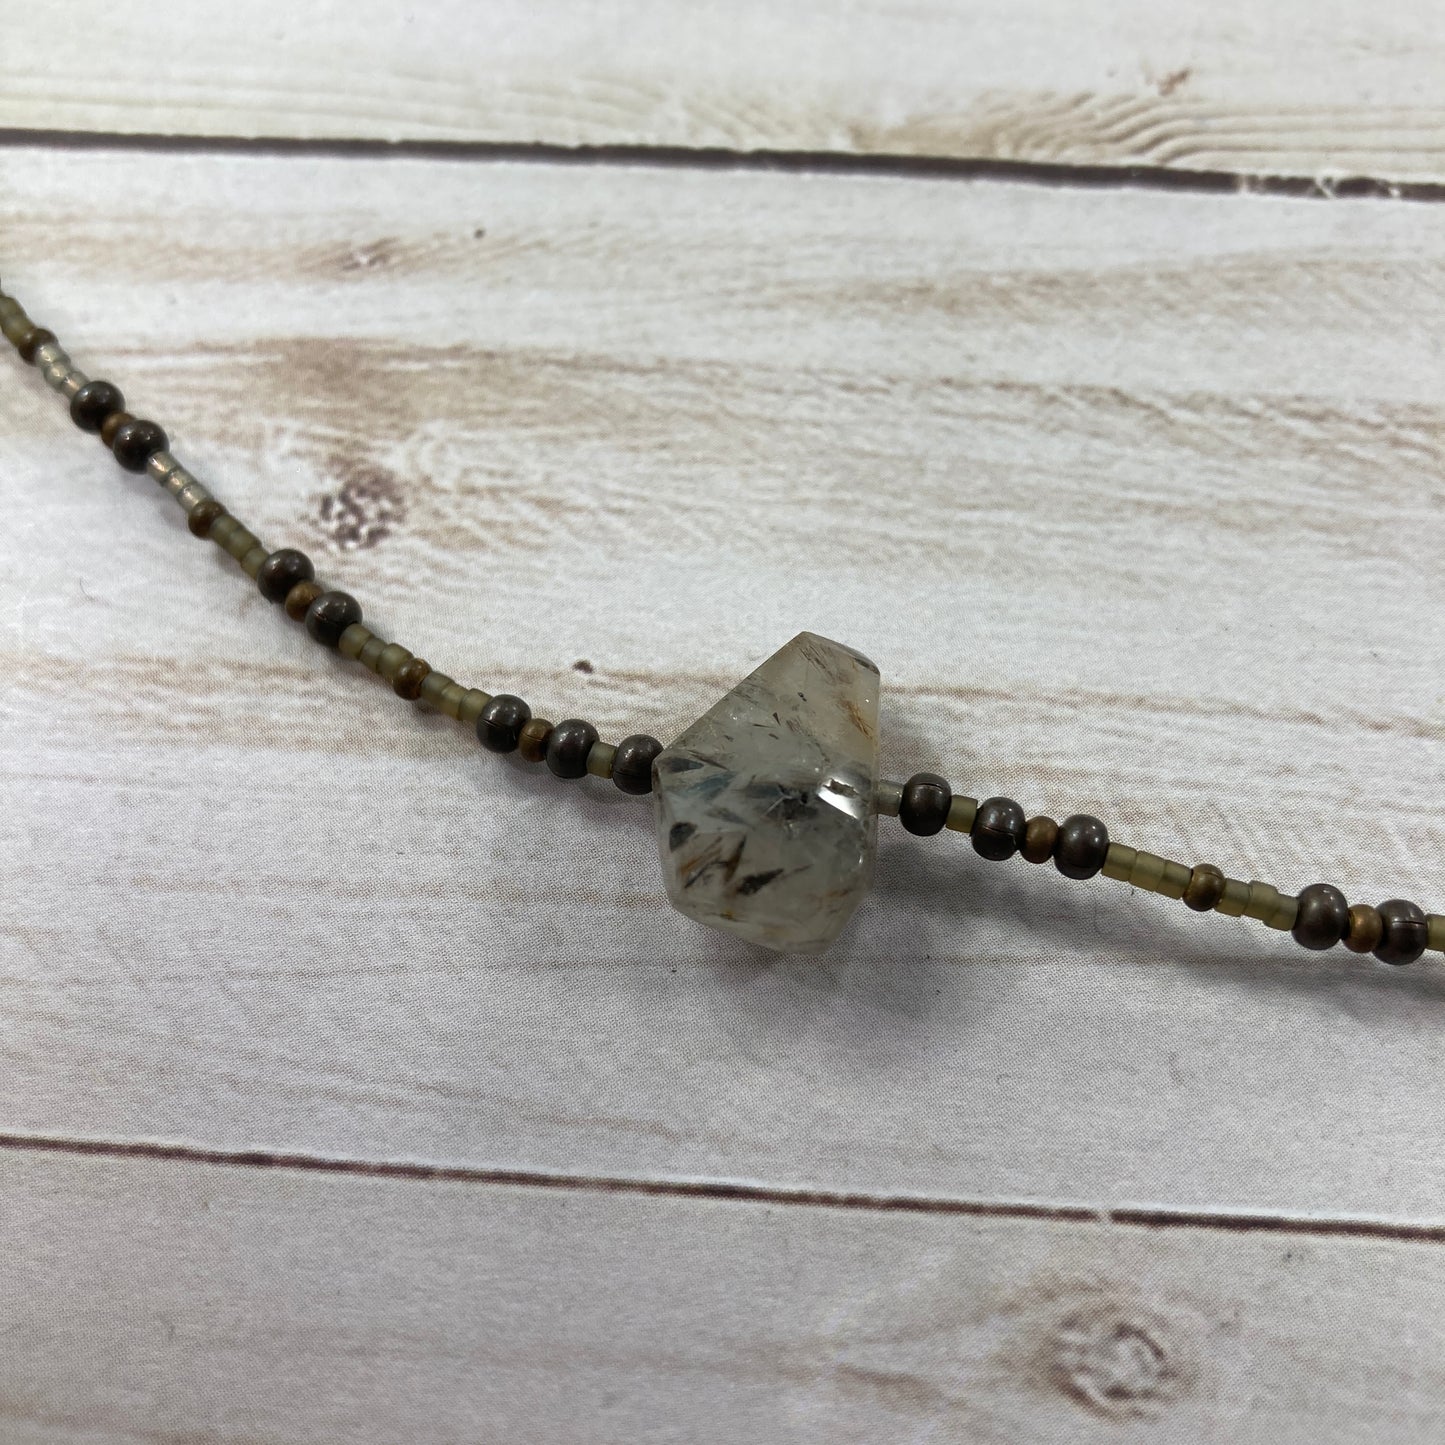 Ascend and Arise Necklace ۞ Rutile Quartz with Metal Beads